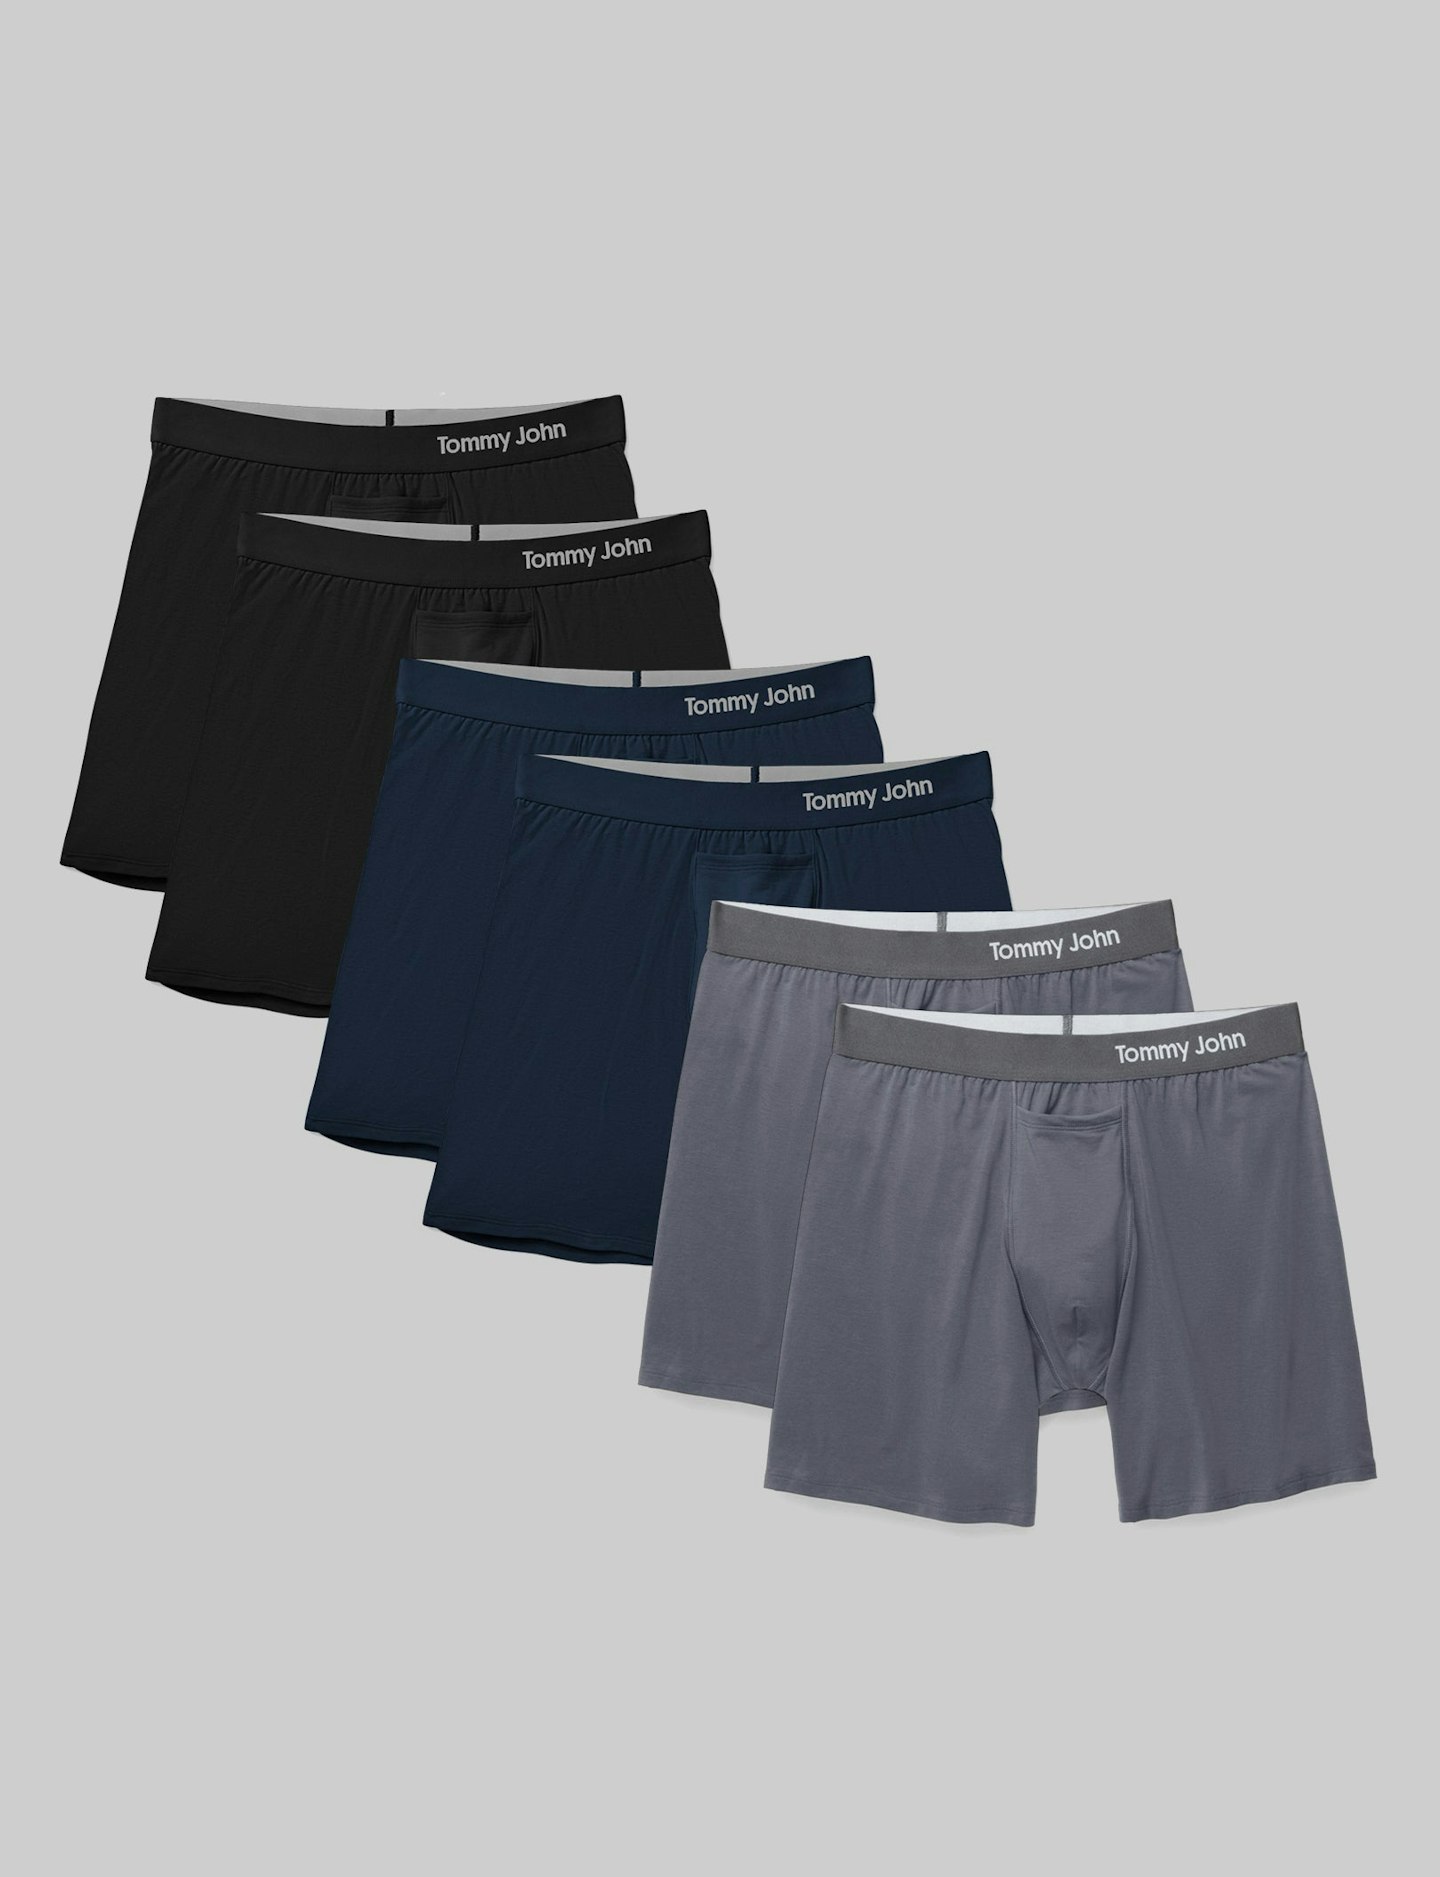 Fruit of the Loom Men's Cotton Stretch Woven Boxer, 6 Pack